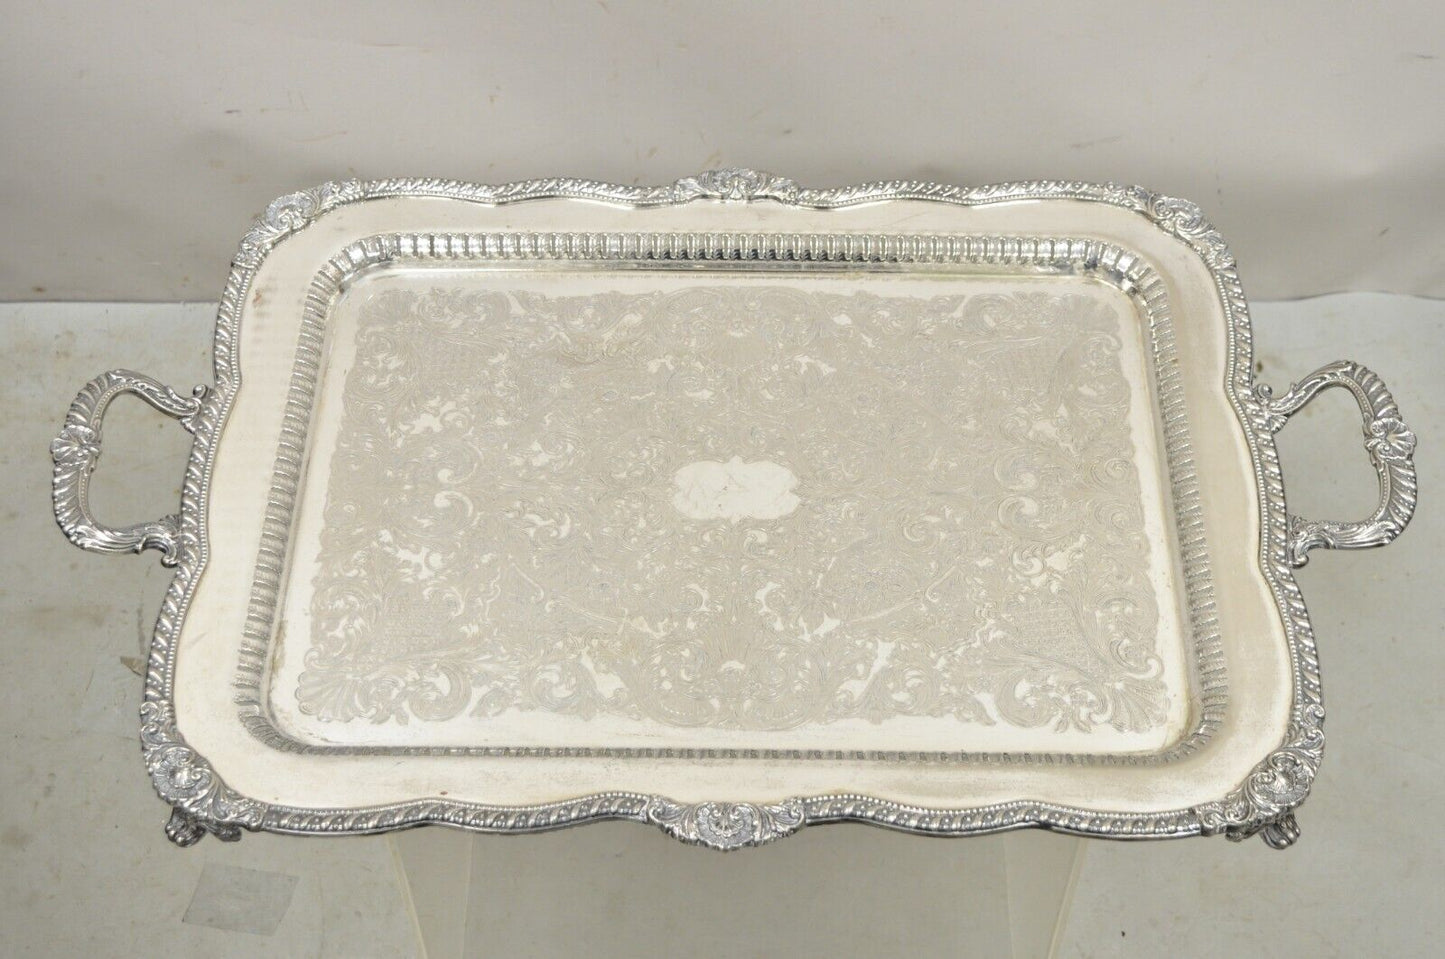 Antique English Victorian Large Pierced Gallery Twin Handle Serving Platter Tray